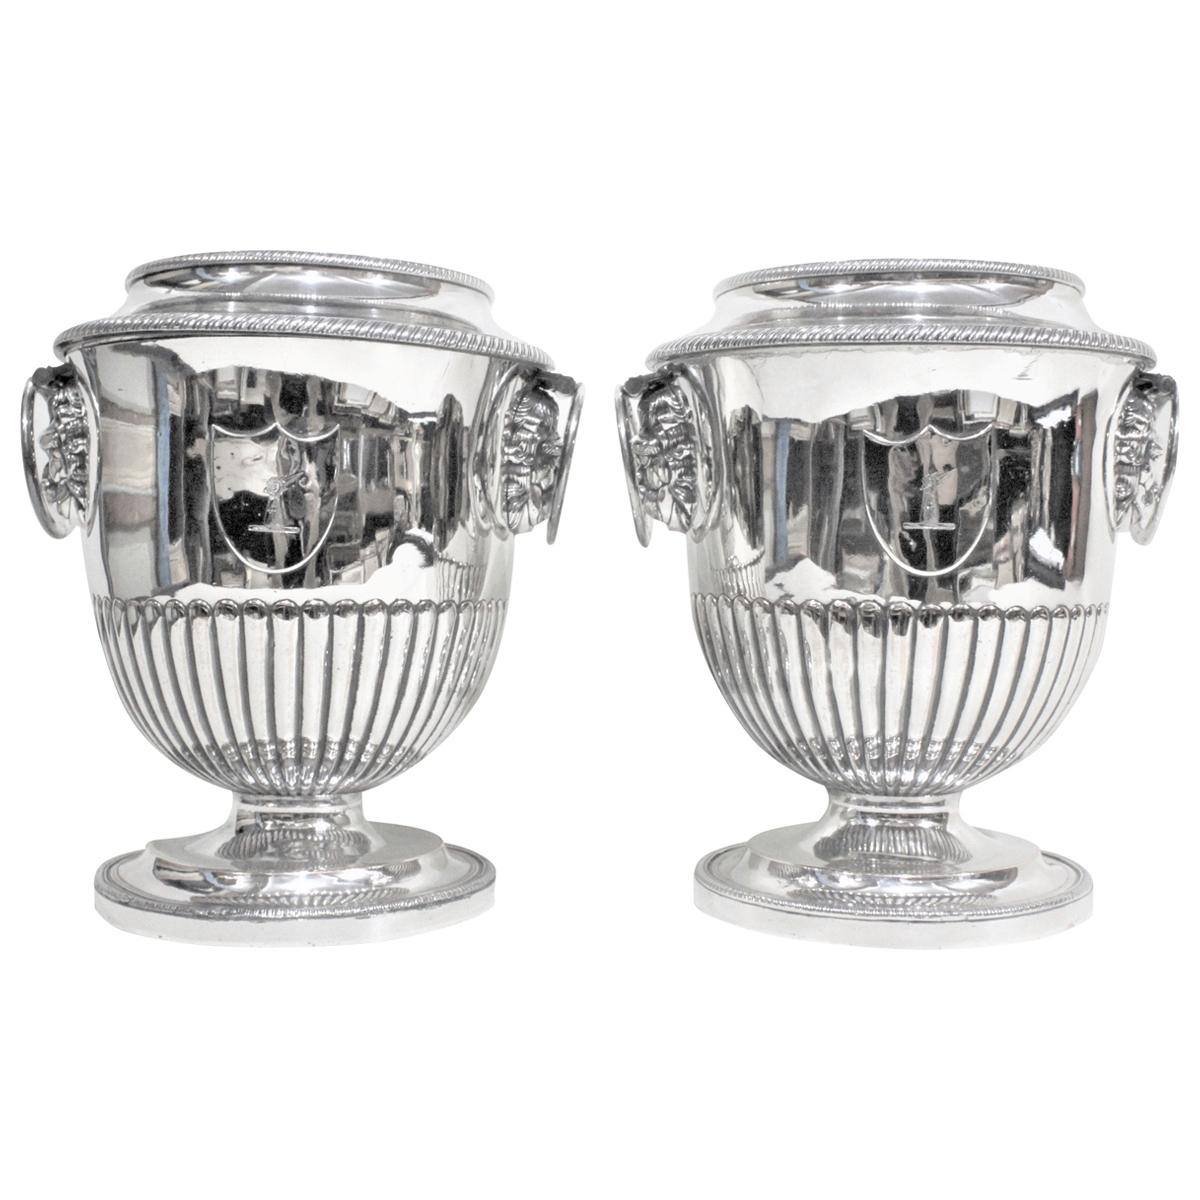 Pair of Antique Sheffield Regency Style Silver Plated Wine Coolers